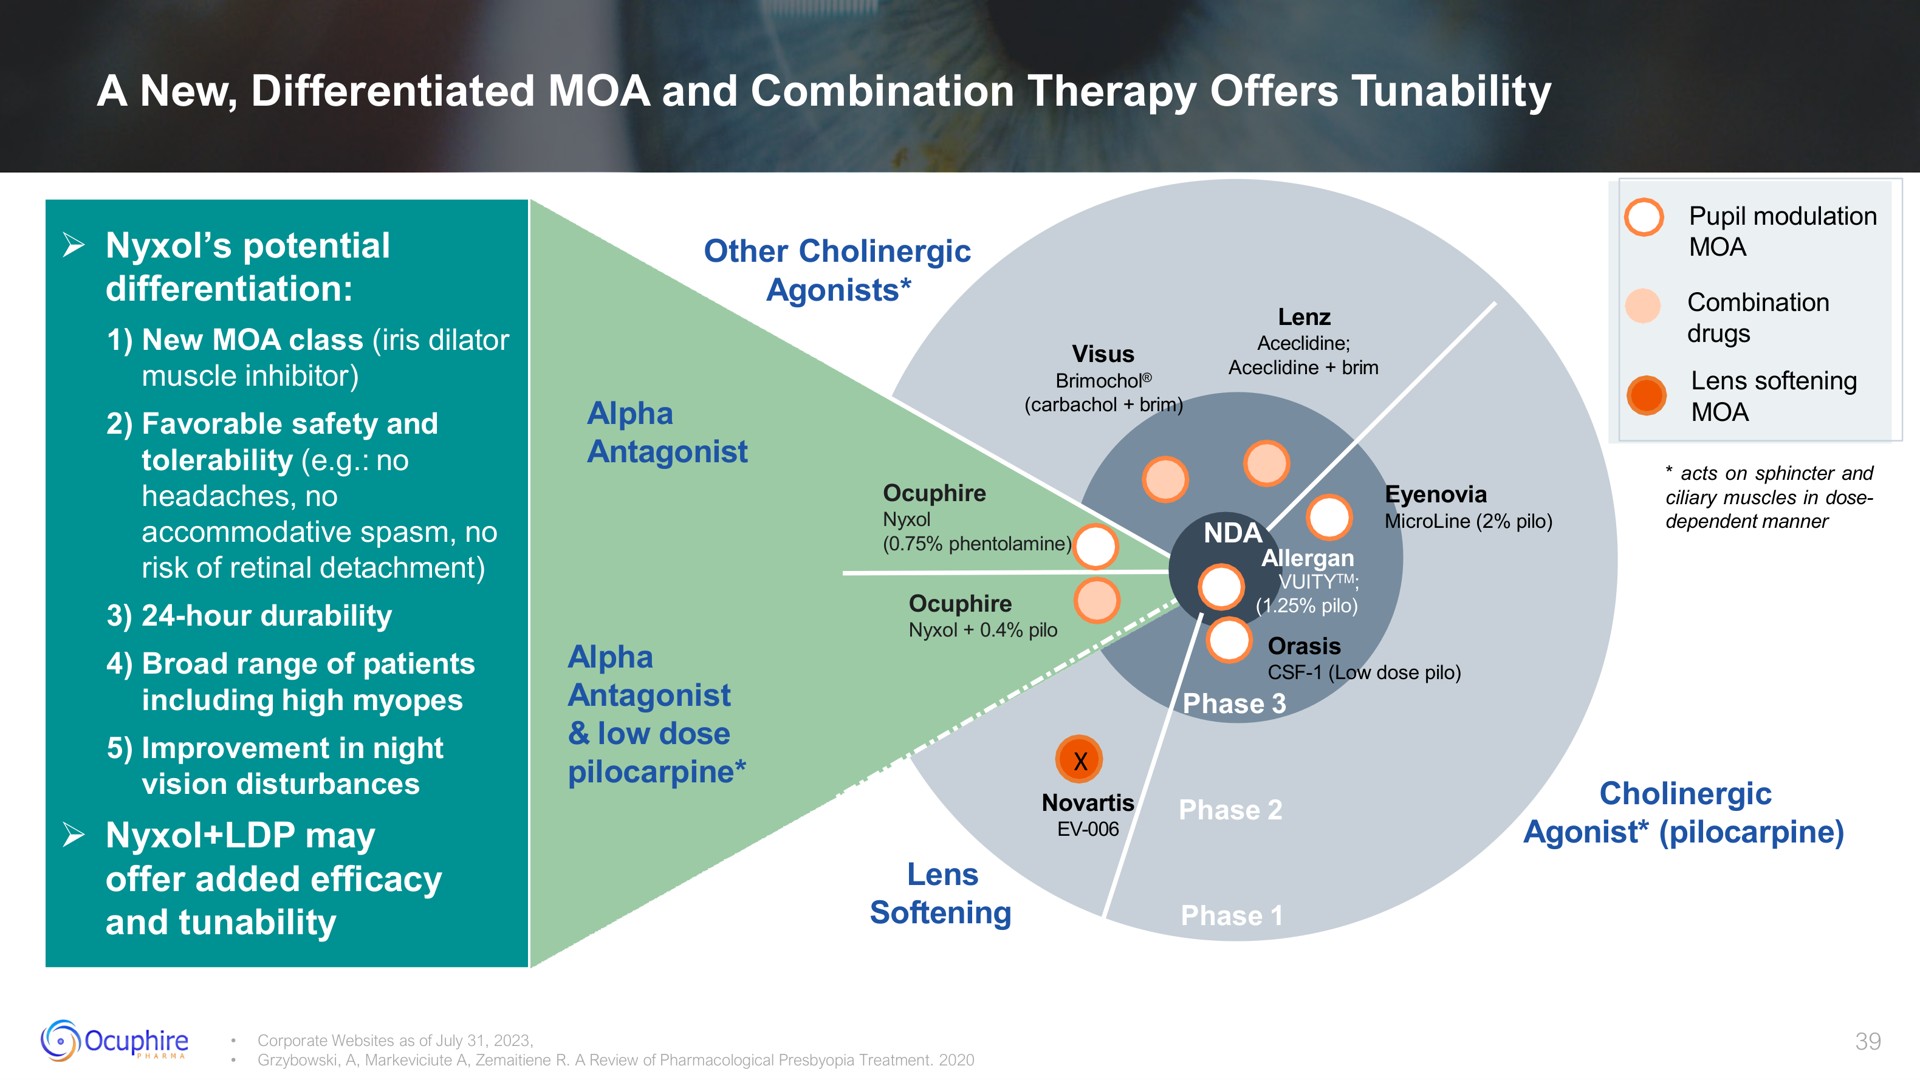 a new differentiated and combination therapy offers potential other cholinergic alpha alpha pilocarpine pole broad range of patients vision disturbances offer added efficacy cholinergic i lens softening | Ocuphire Pharma